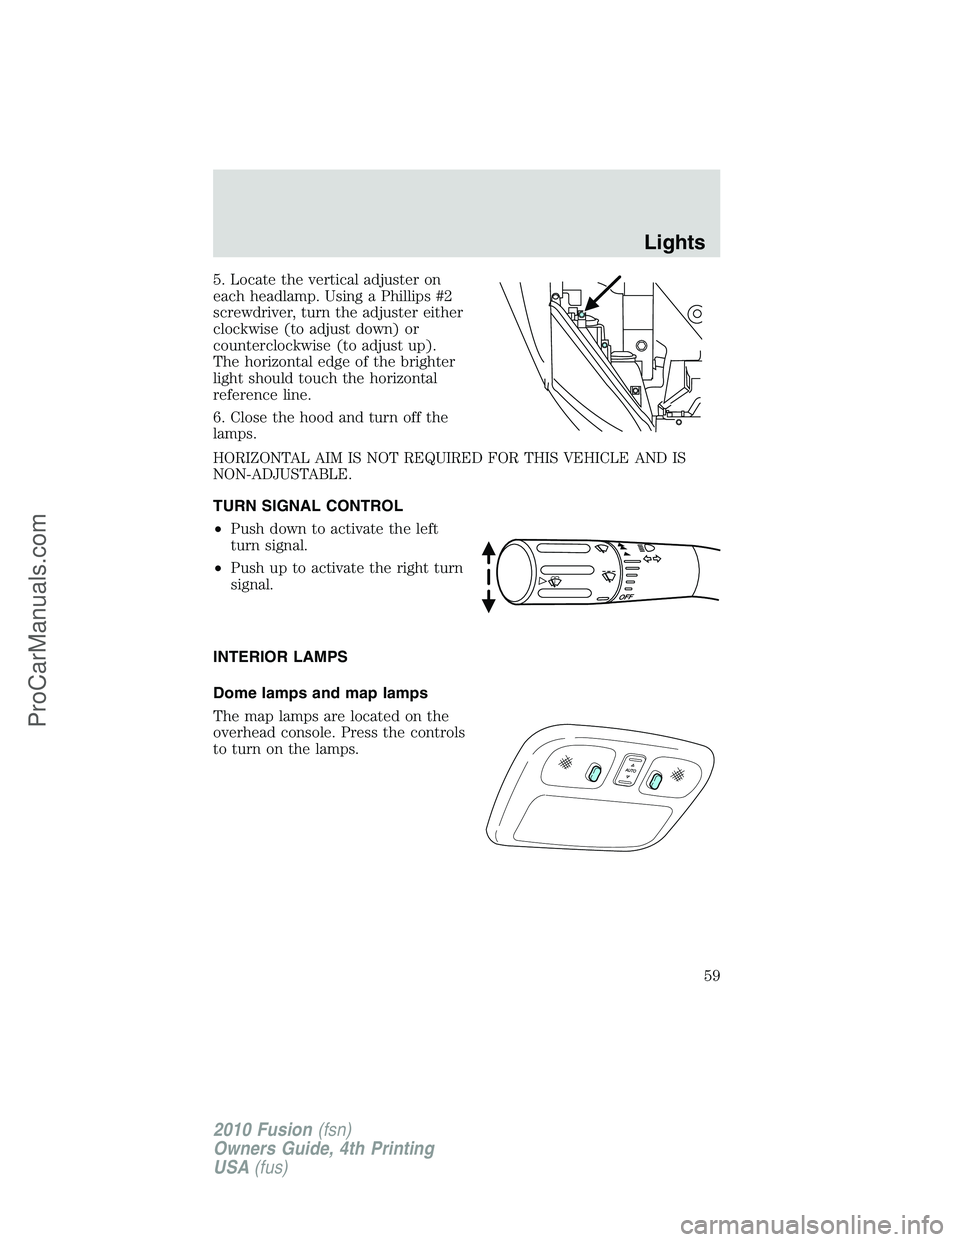 FORD FUSION 2010 Workshop Manual 5. Locate the vertical adjuster on
each headlamp. Using a Phillips #2
screwdriver, turn the adjuster either
clockwise (to adjust down) or
counterclockwise (to adjust up).
The horizontal edge of the br